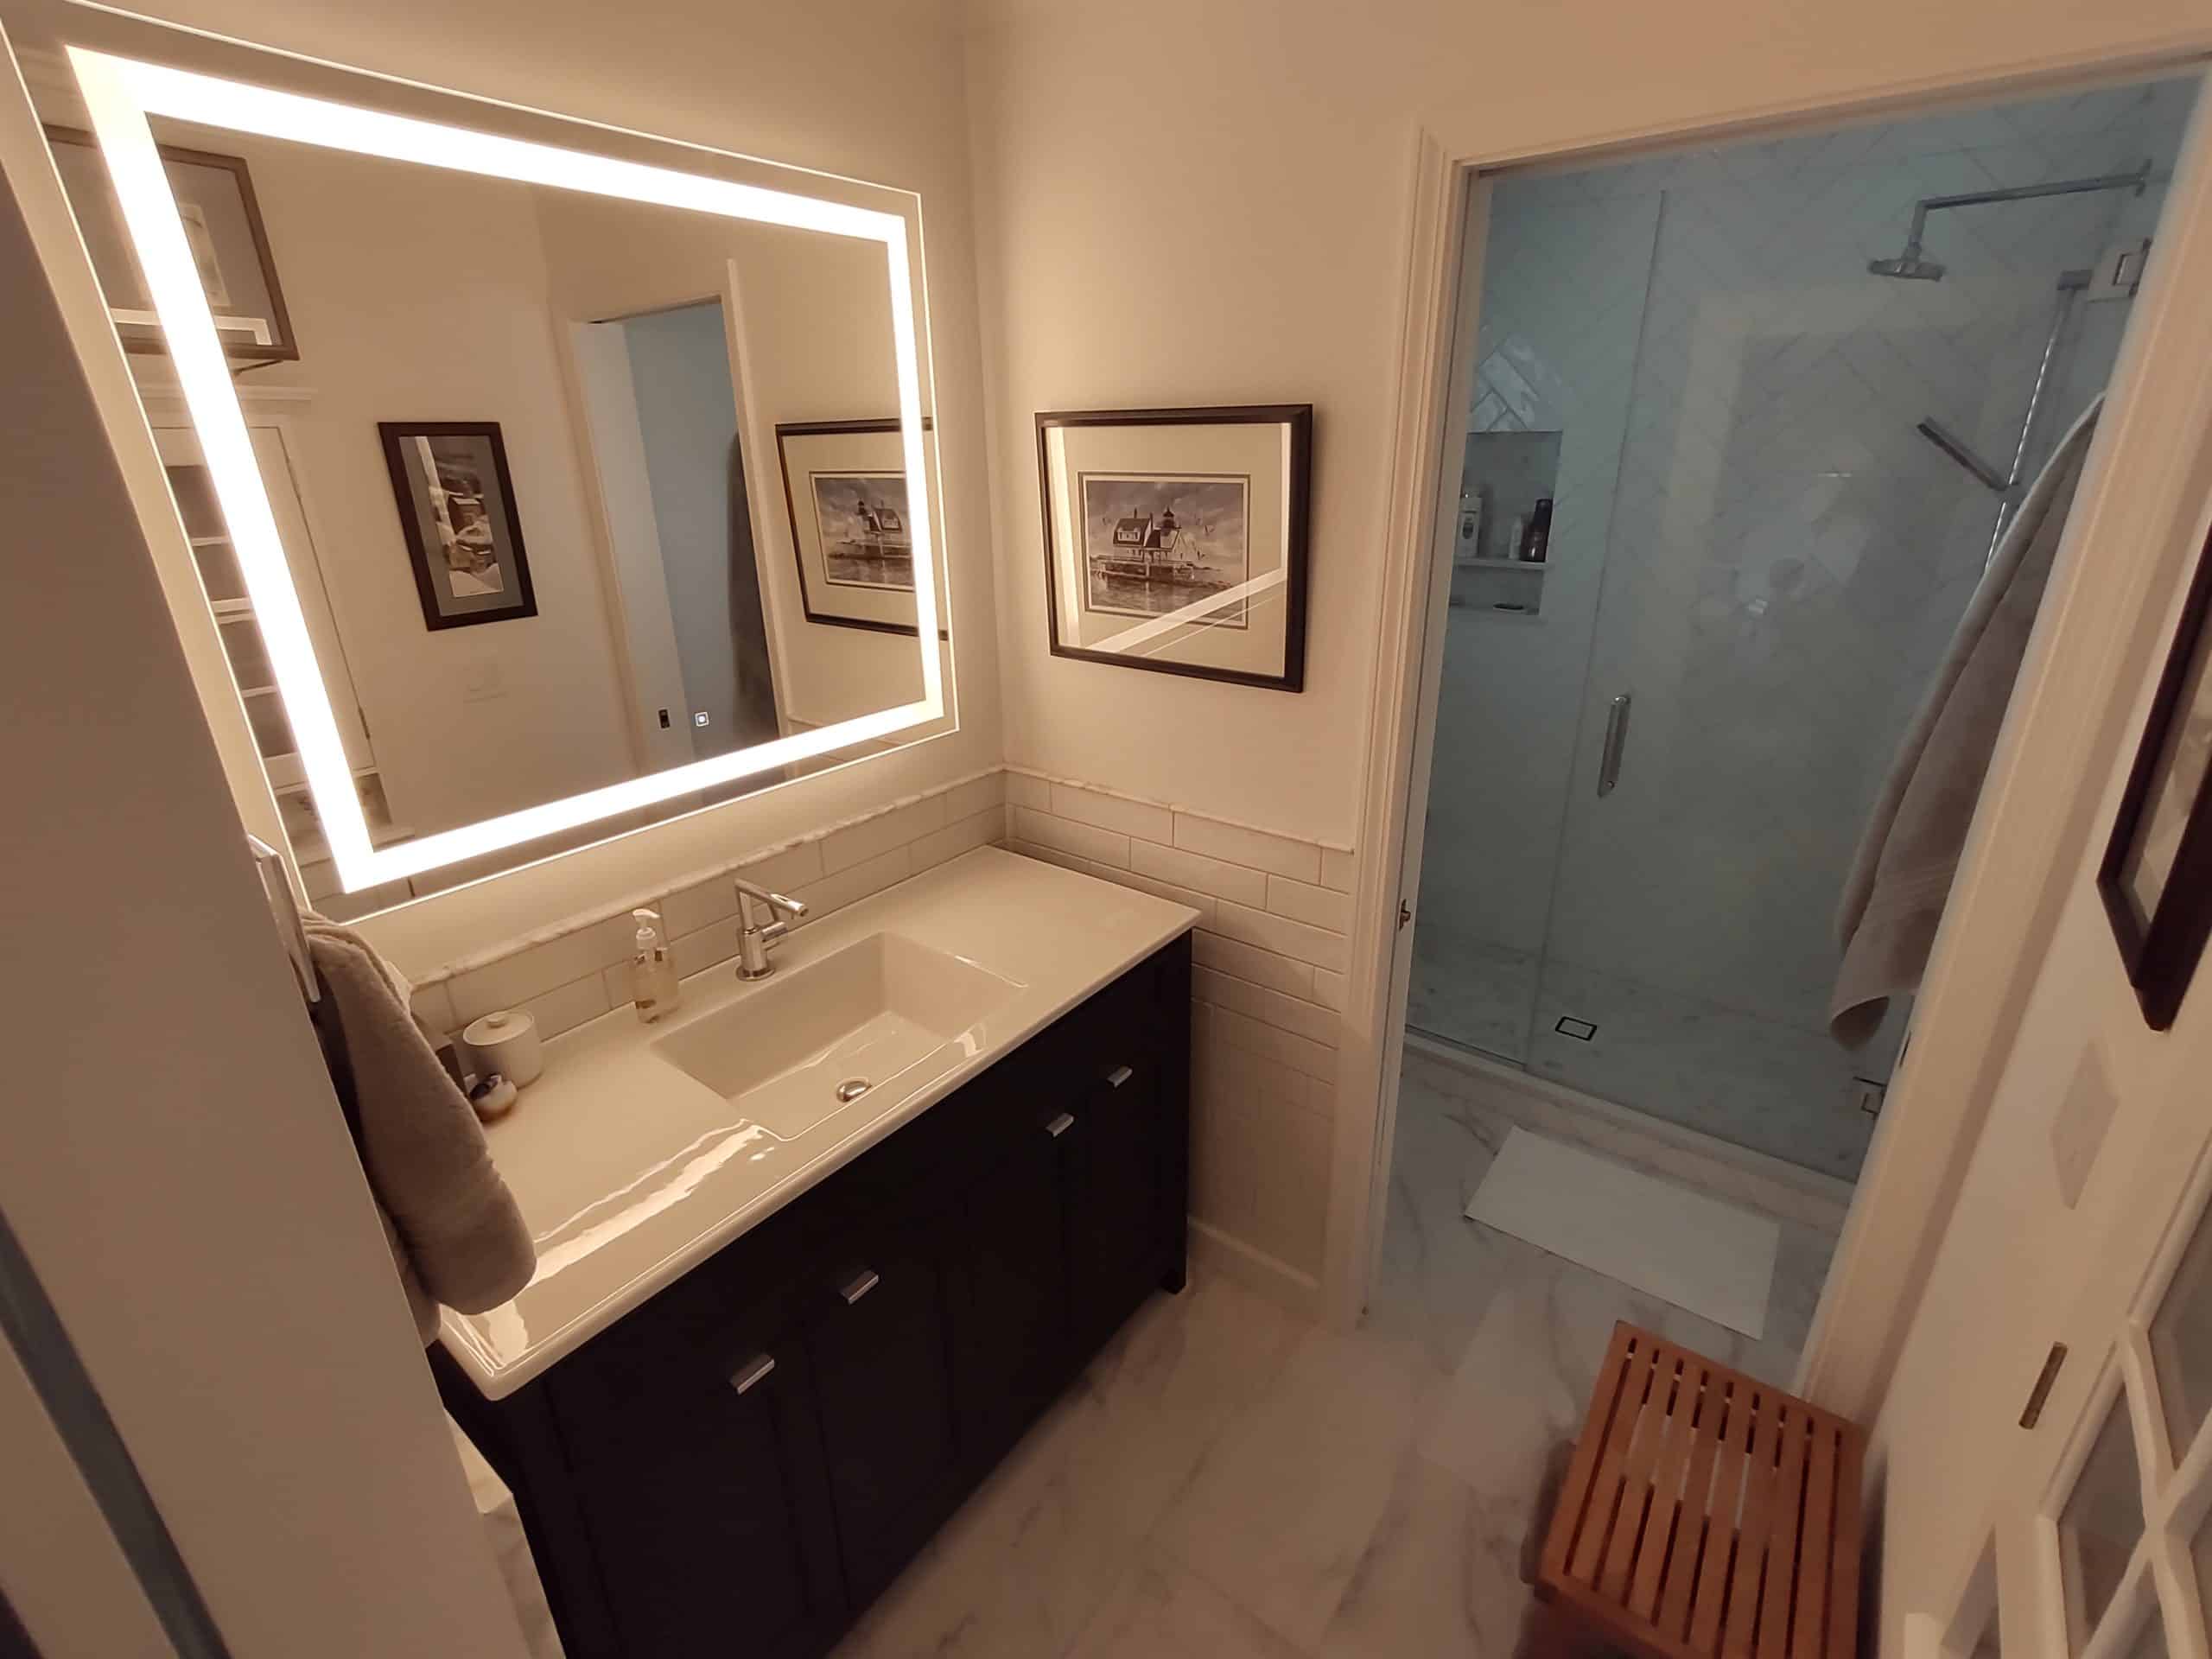 Wide-angle image of a remodeled bathroom with herringbone tile shower. On the left is a vanity with an LED mirror and tiled wall surround.